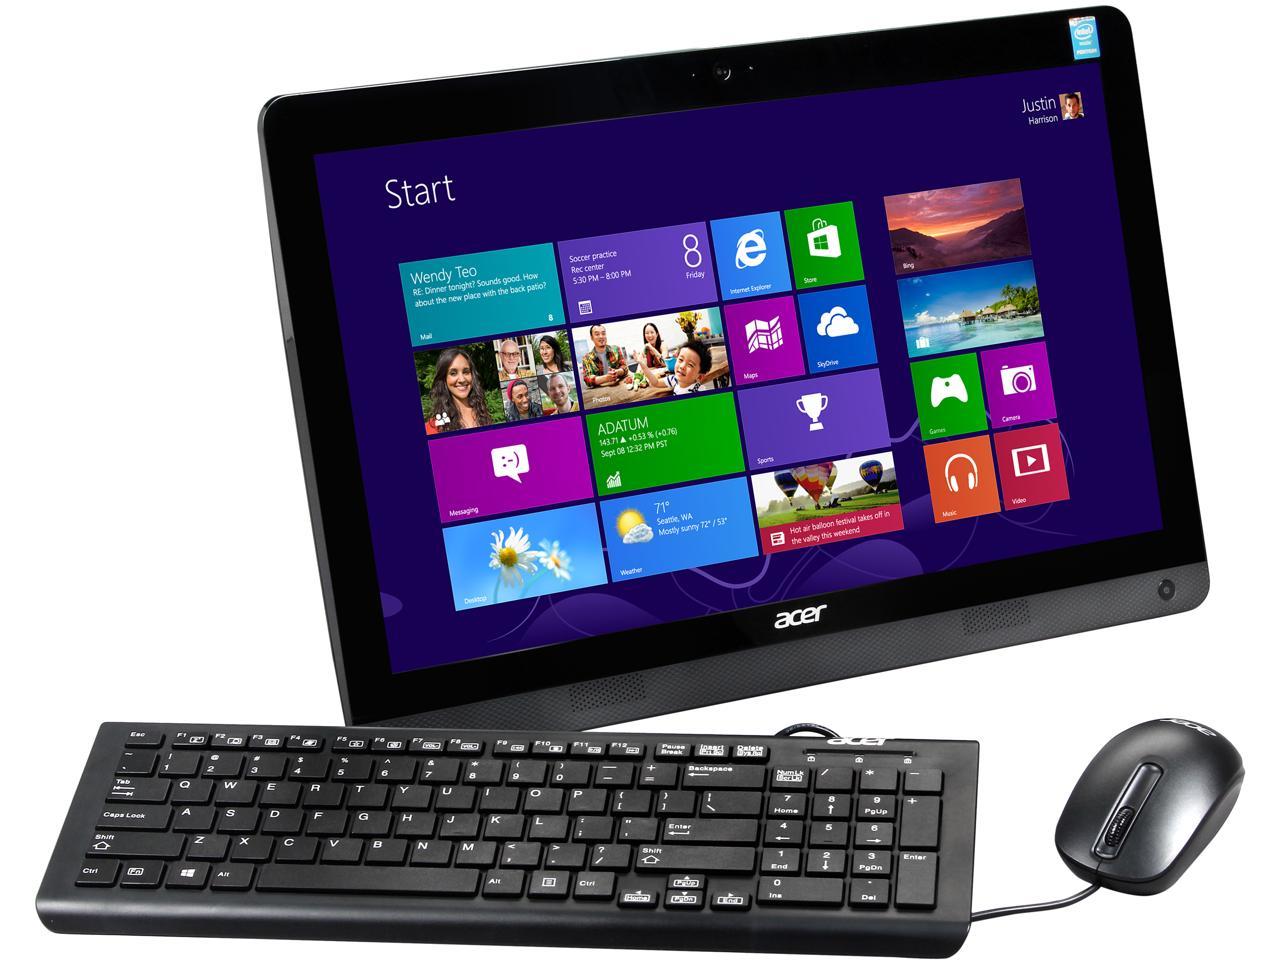 Acer Aspire ZC-606. Acer Aspire ZC-107. ASUS Aspire ПК. Acer all in one.